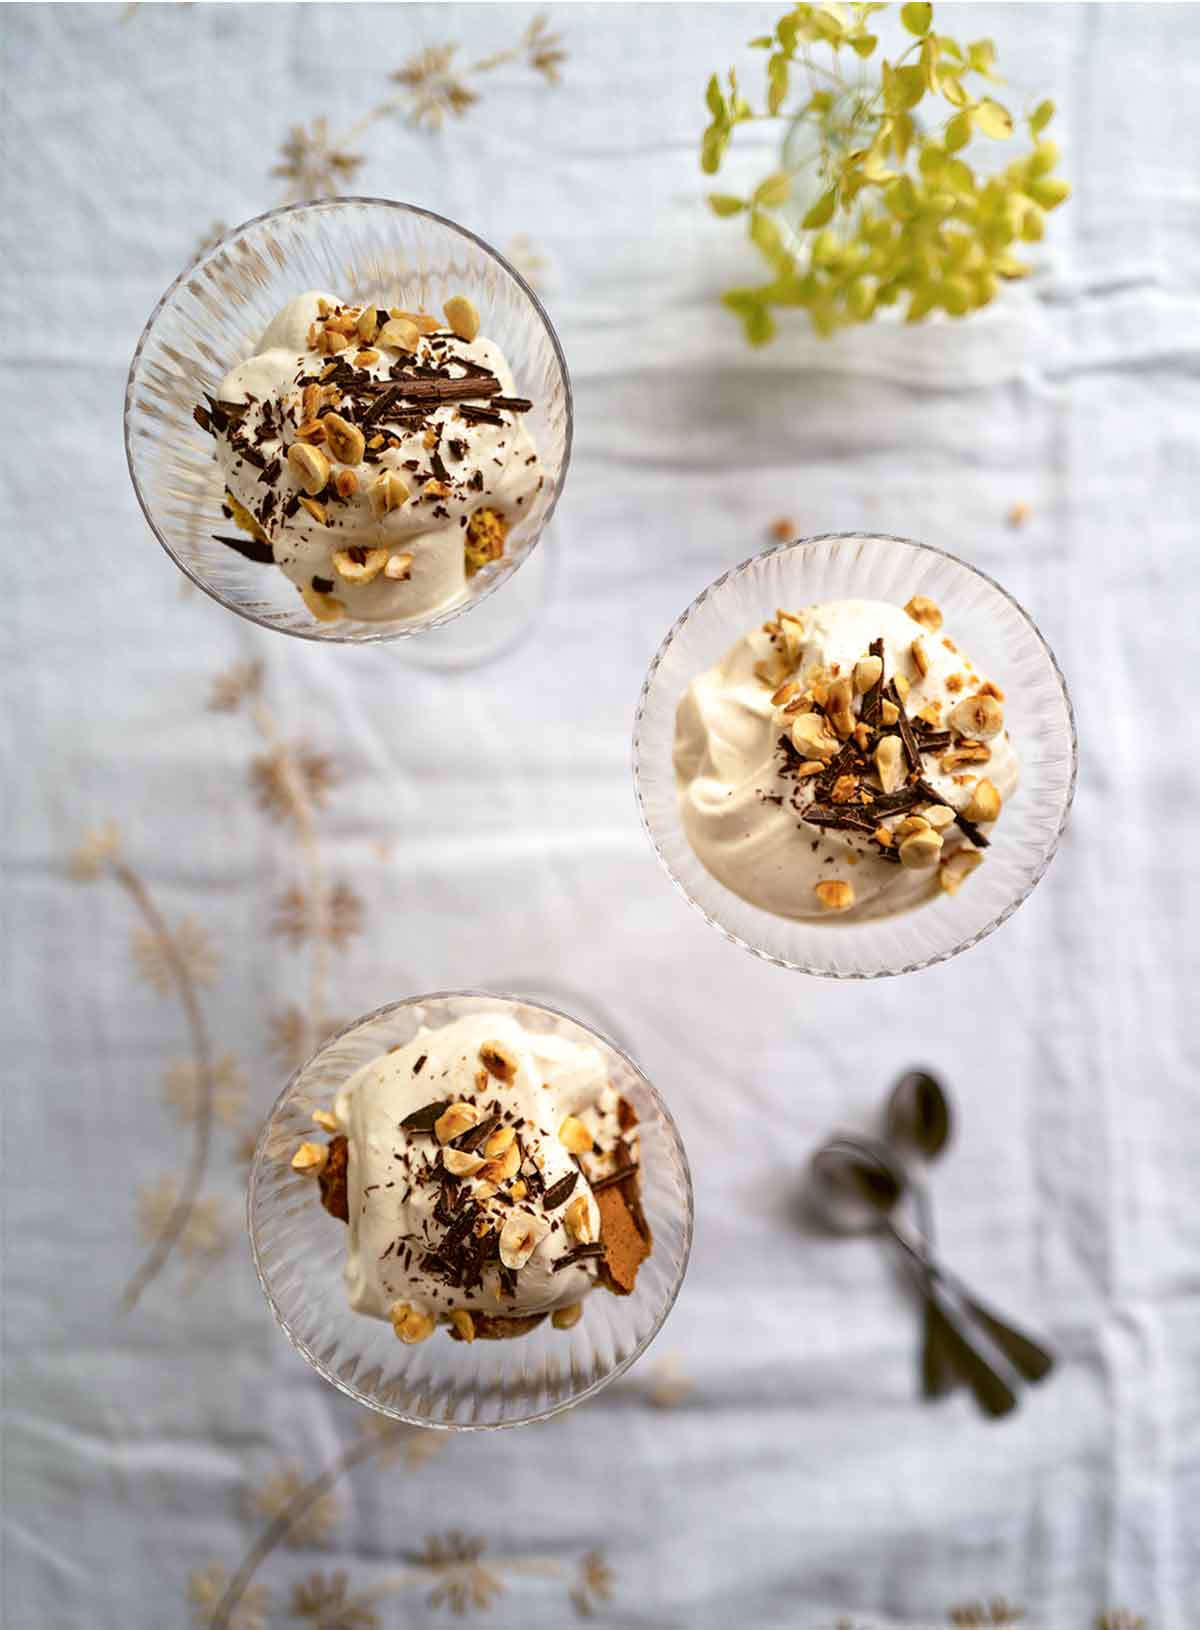 Three glass bowls filled with coffee mousse sprinkled with nuts, on a white tablecloth.